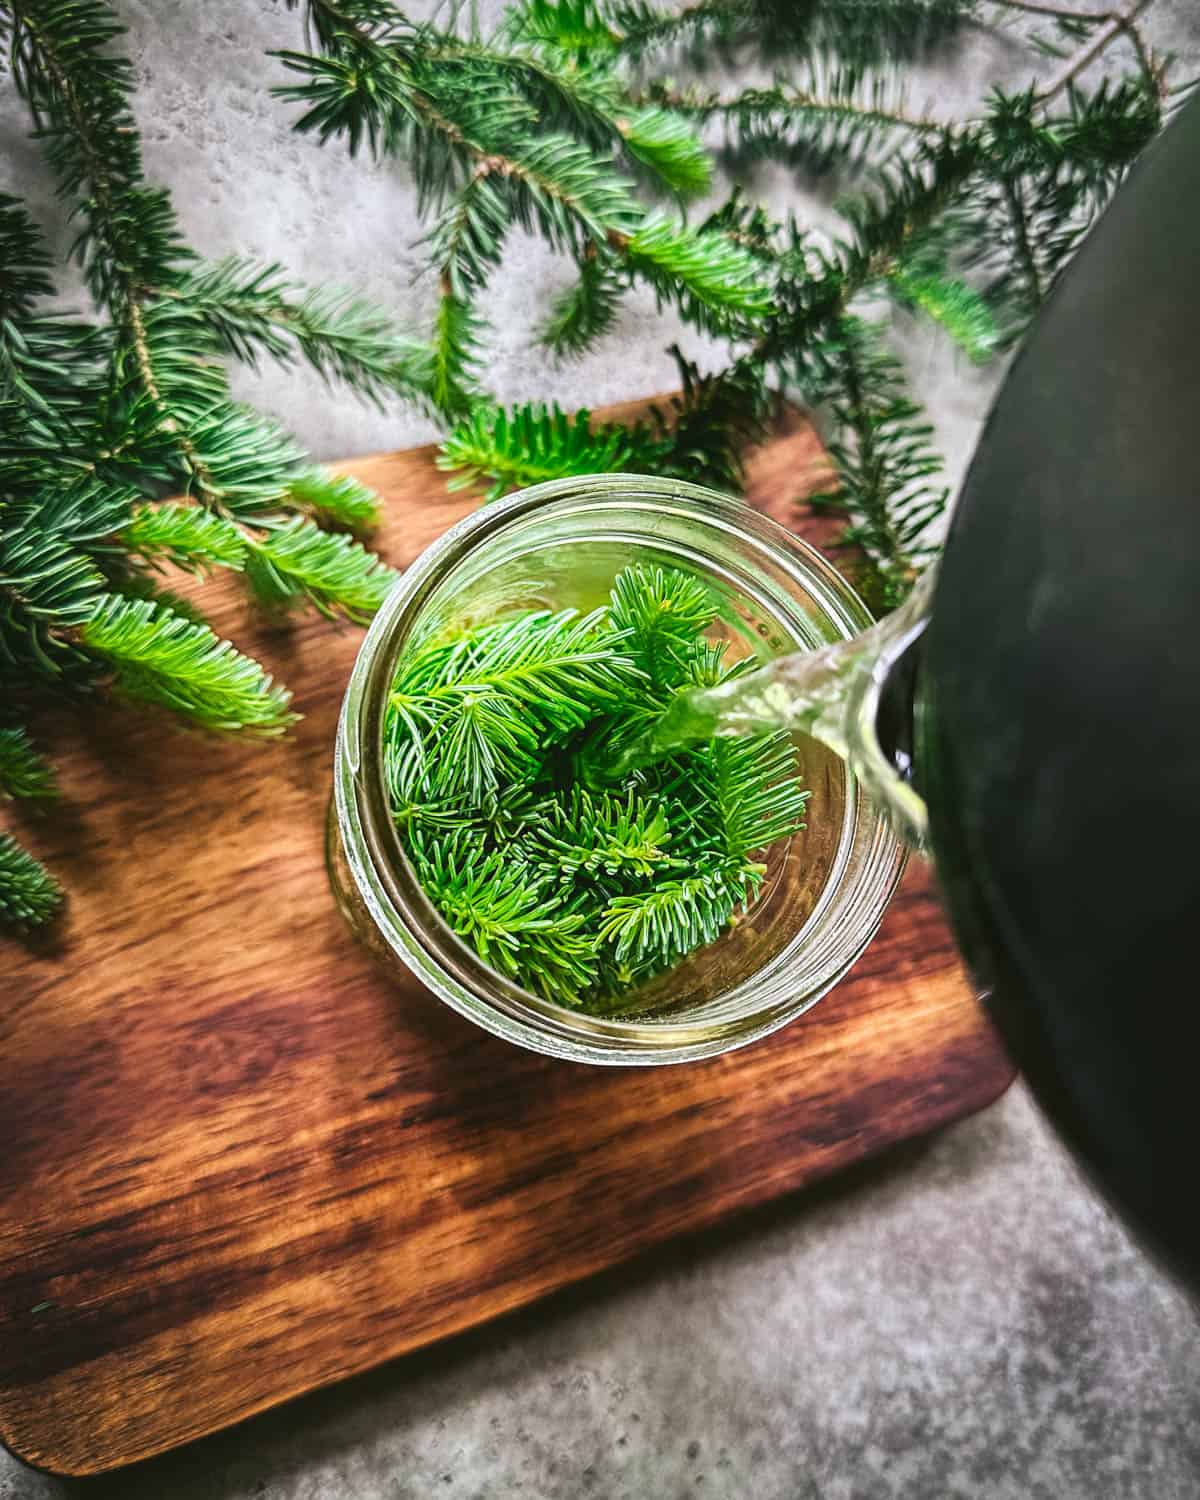 Boiling water pouring into the jar over the fir tips, on a wood cutting board with fir branches surrounding. Top view. 